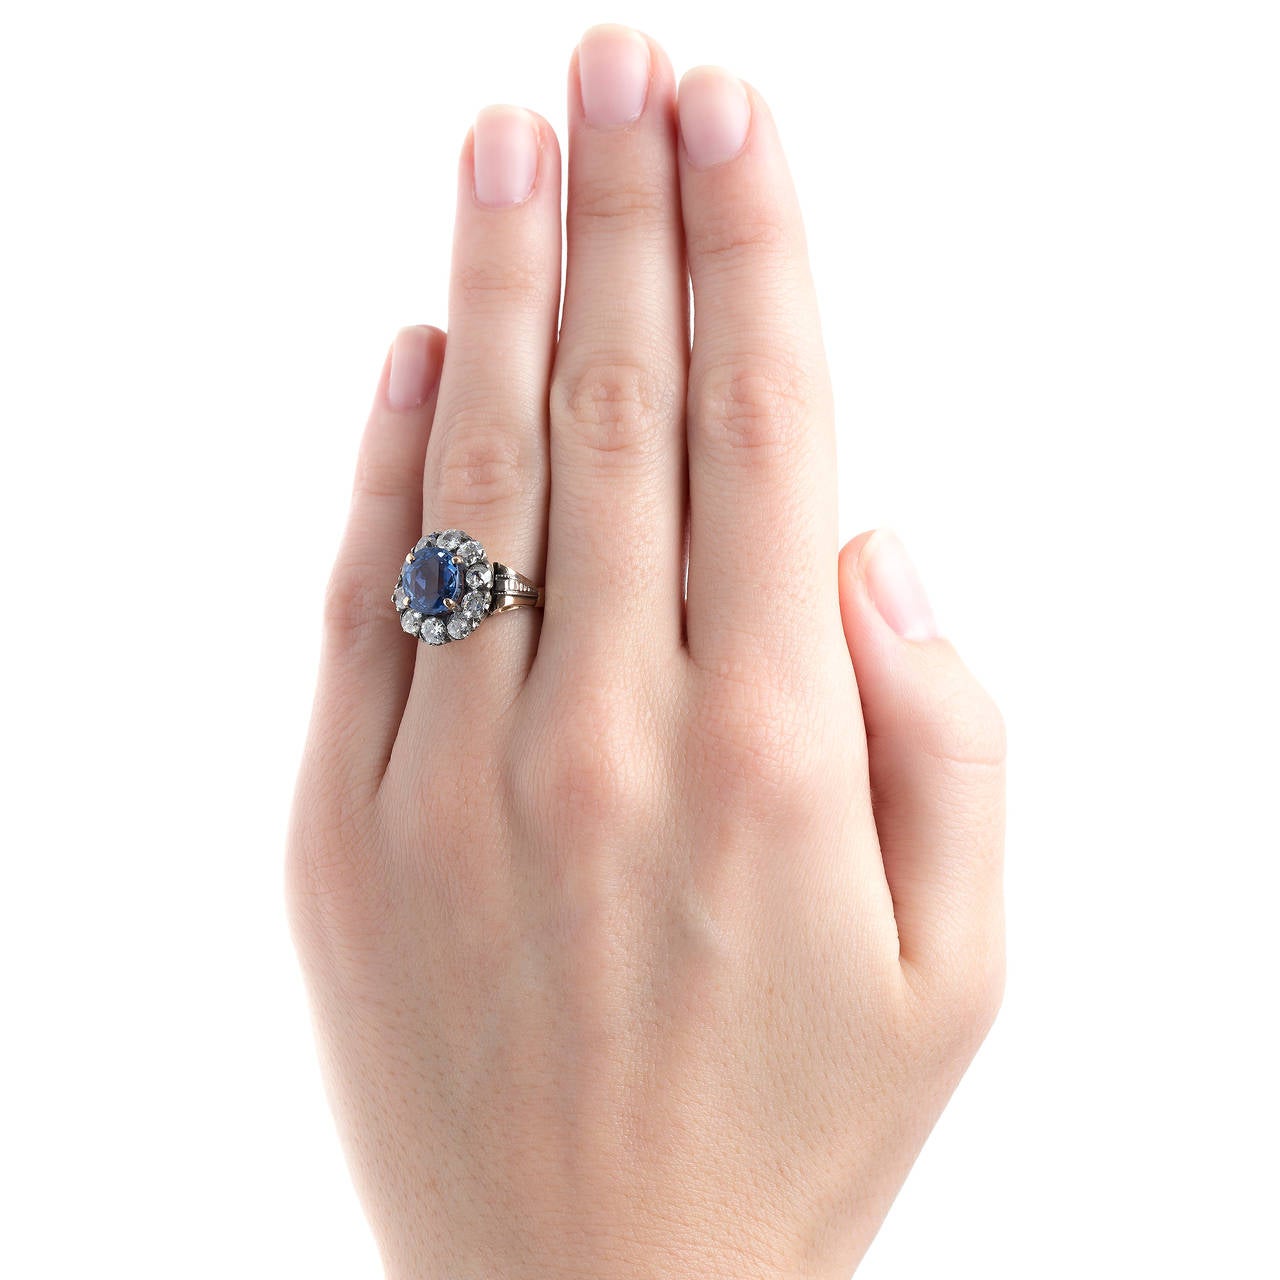 Whitewater is a favorite here at T&H! The show-stopping authentic Victorian era (circa 1880) silver topped 14k rose gold ring centers 3.55ct oval natural sapphire accompanied by a Guild Laboratories certificate stating the sapphire is unheated with